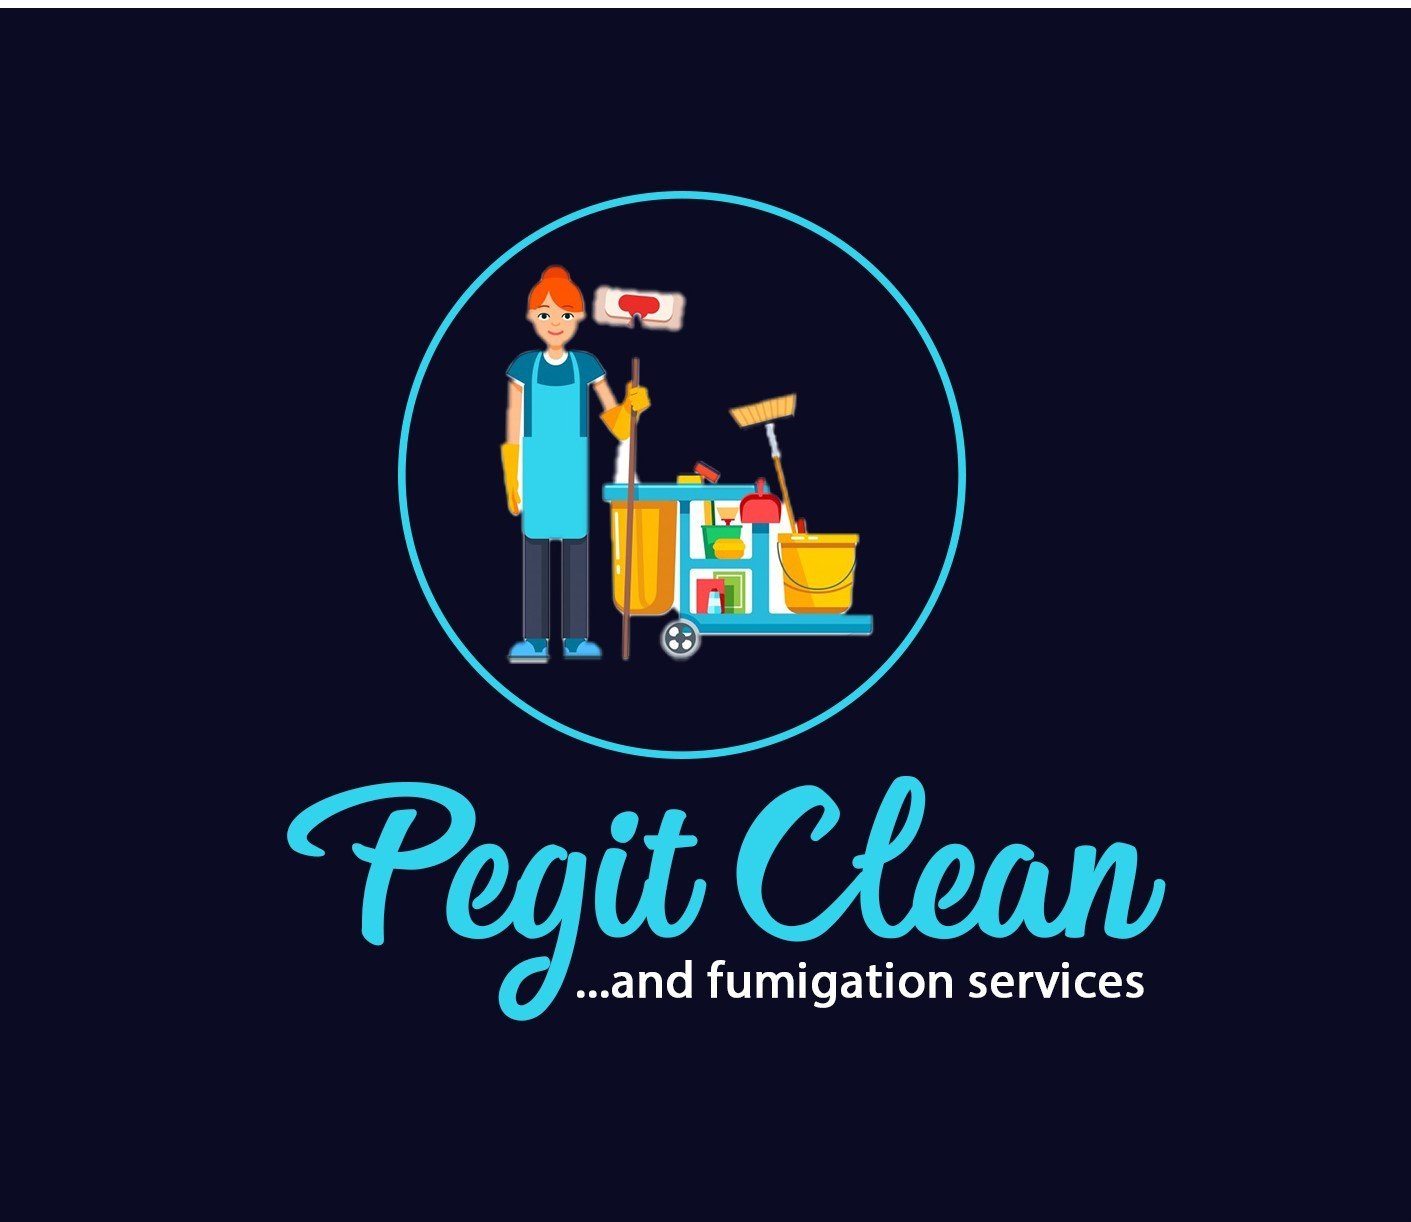 Home, Office, Post construction, Post event, Hotel, janitorial cleaning, Fumigation(Home and Office)
Call us today; 09099868488, 08137366370